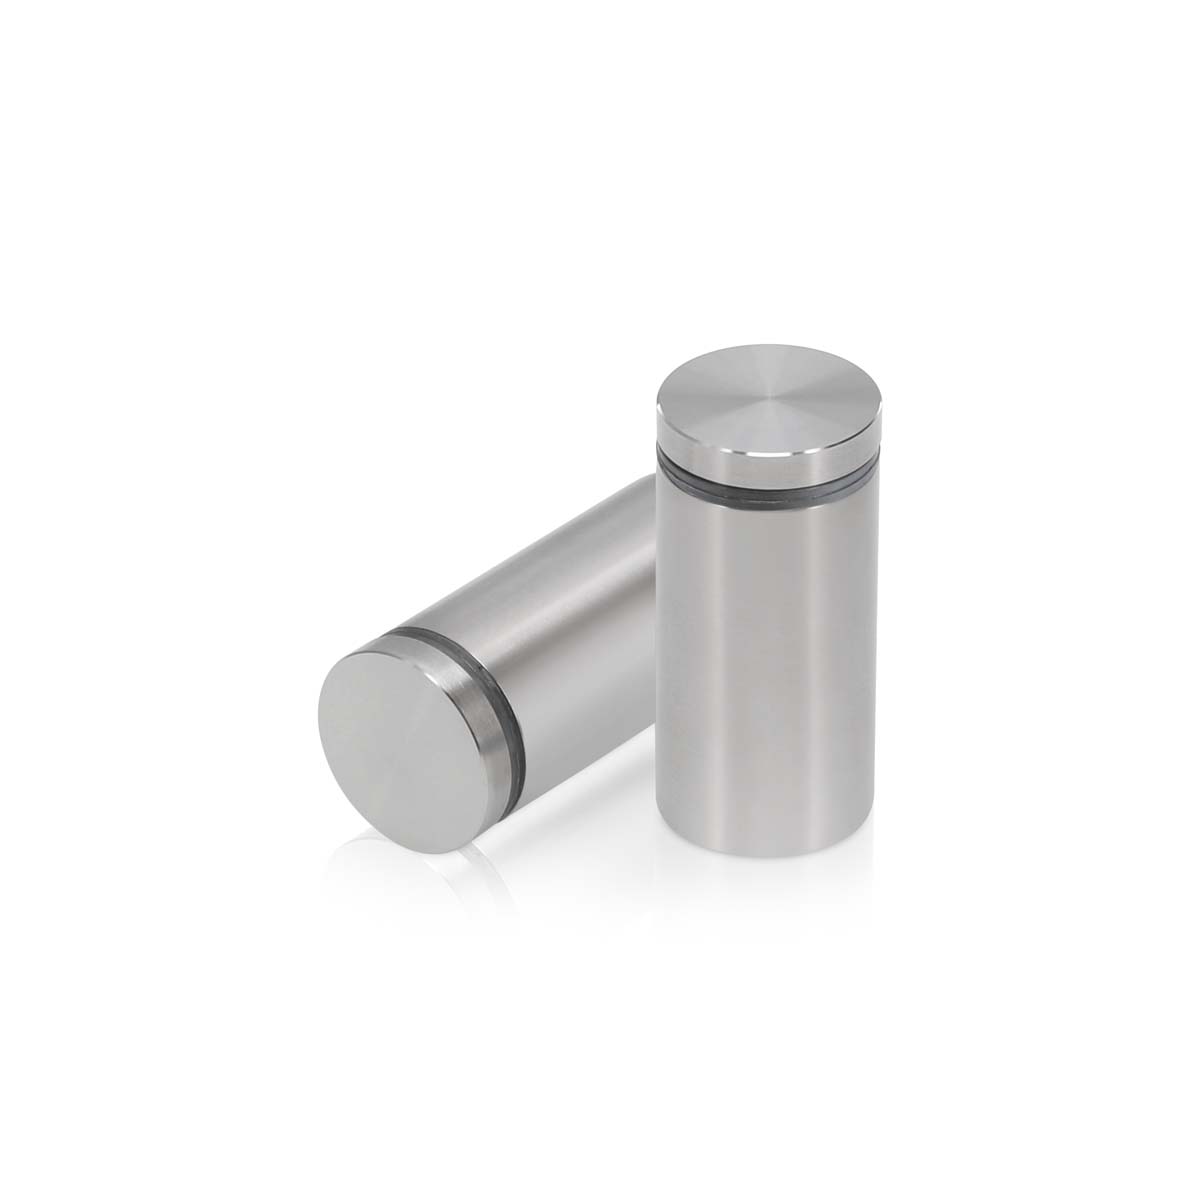 1'' Diameter X 1-3/4'' Barrel Length, Stainless Steel Brushed Finish. Easy Fasten Standoff (For Inside Use Only) [Required Material Hole Size: 7/16'']